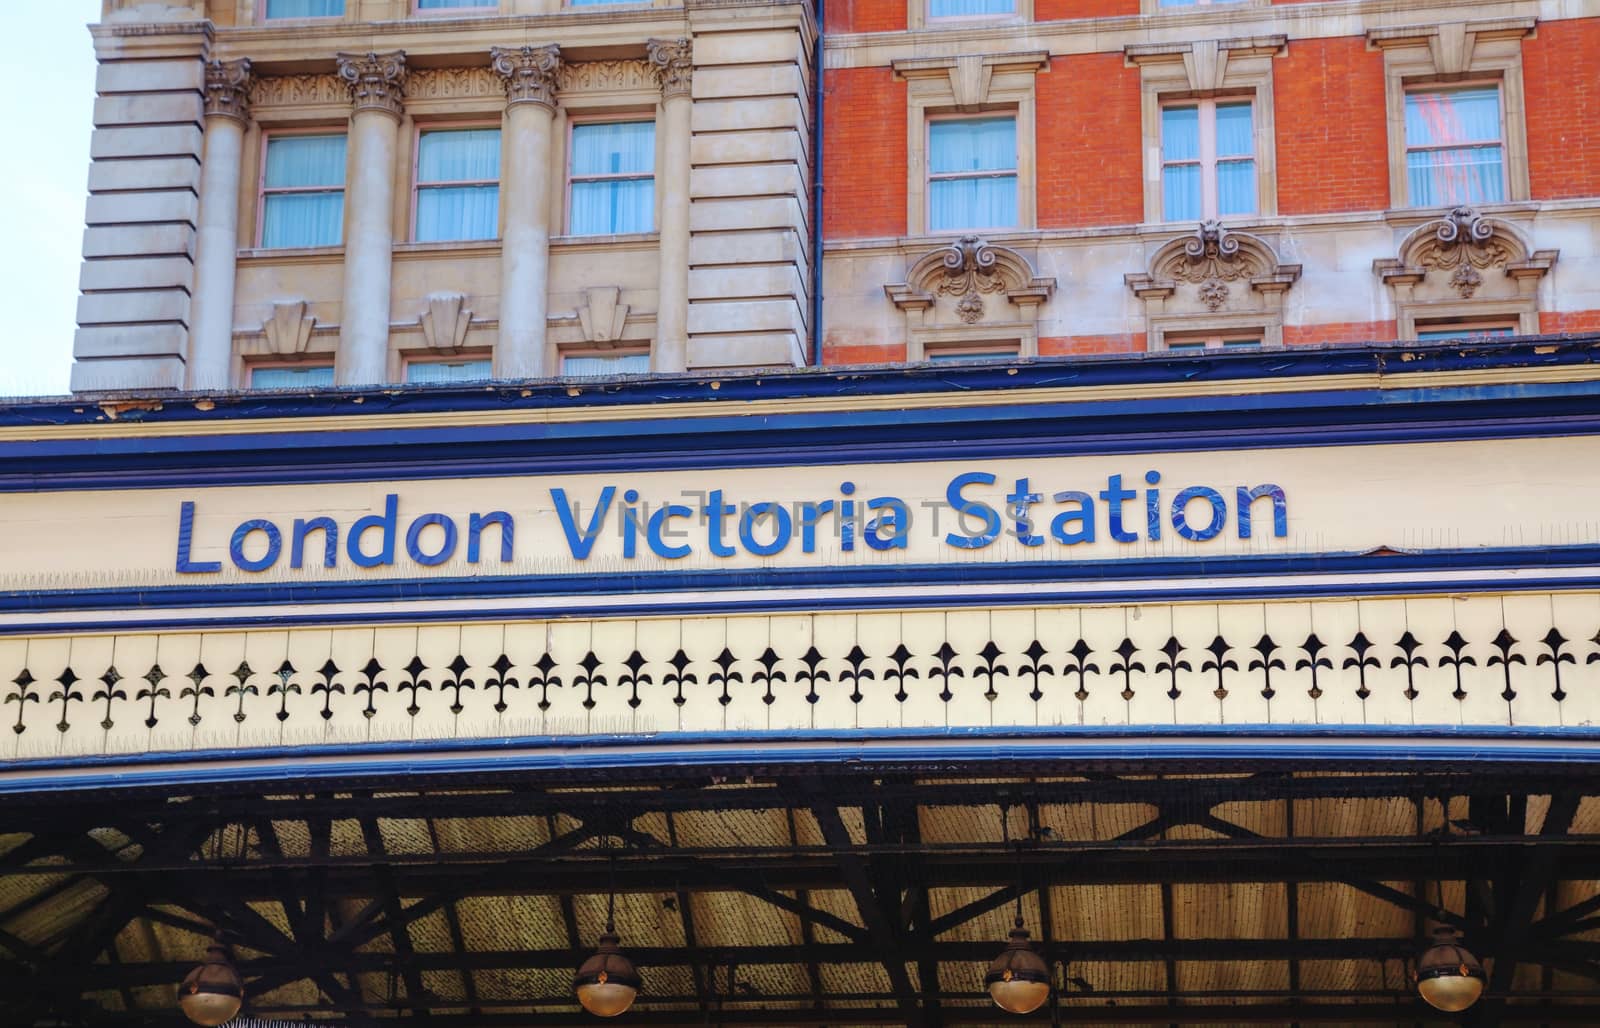 London Victoria station sign by AndreyKr